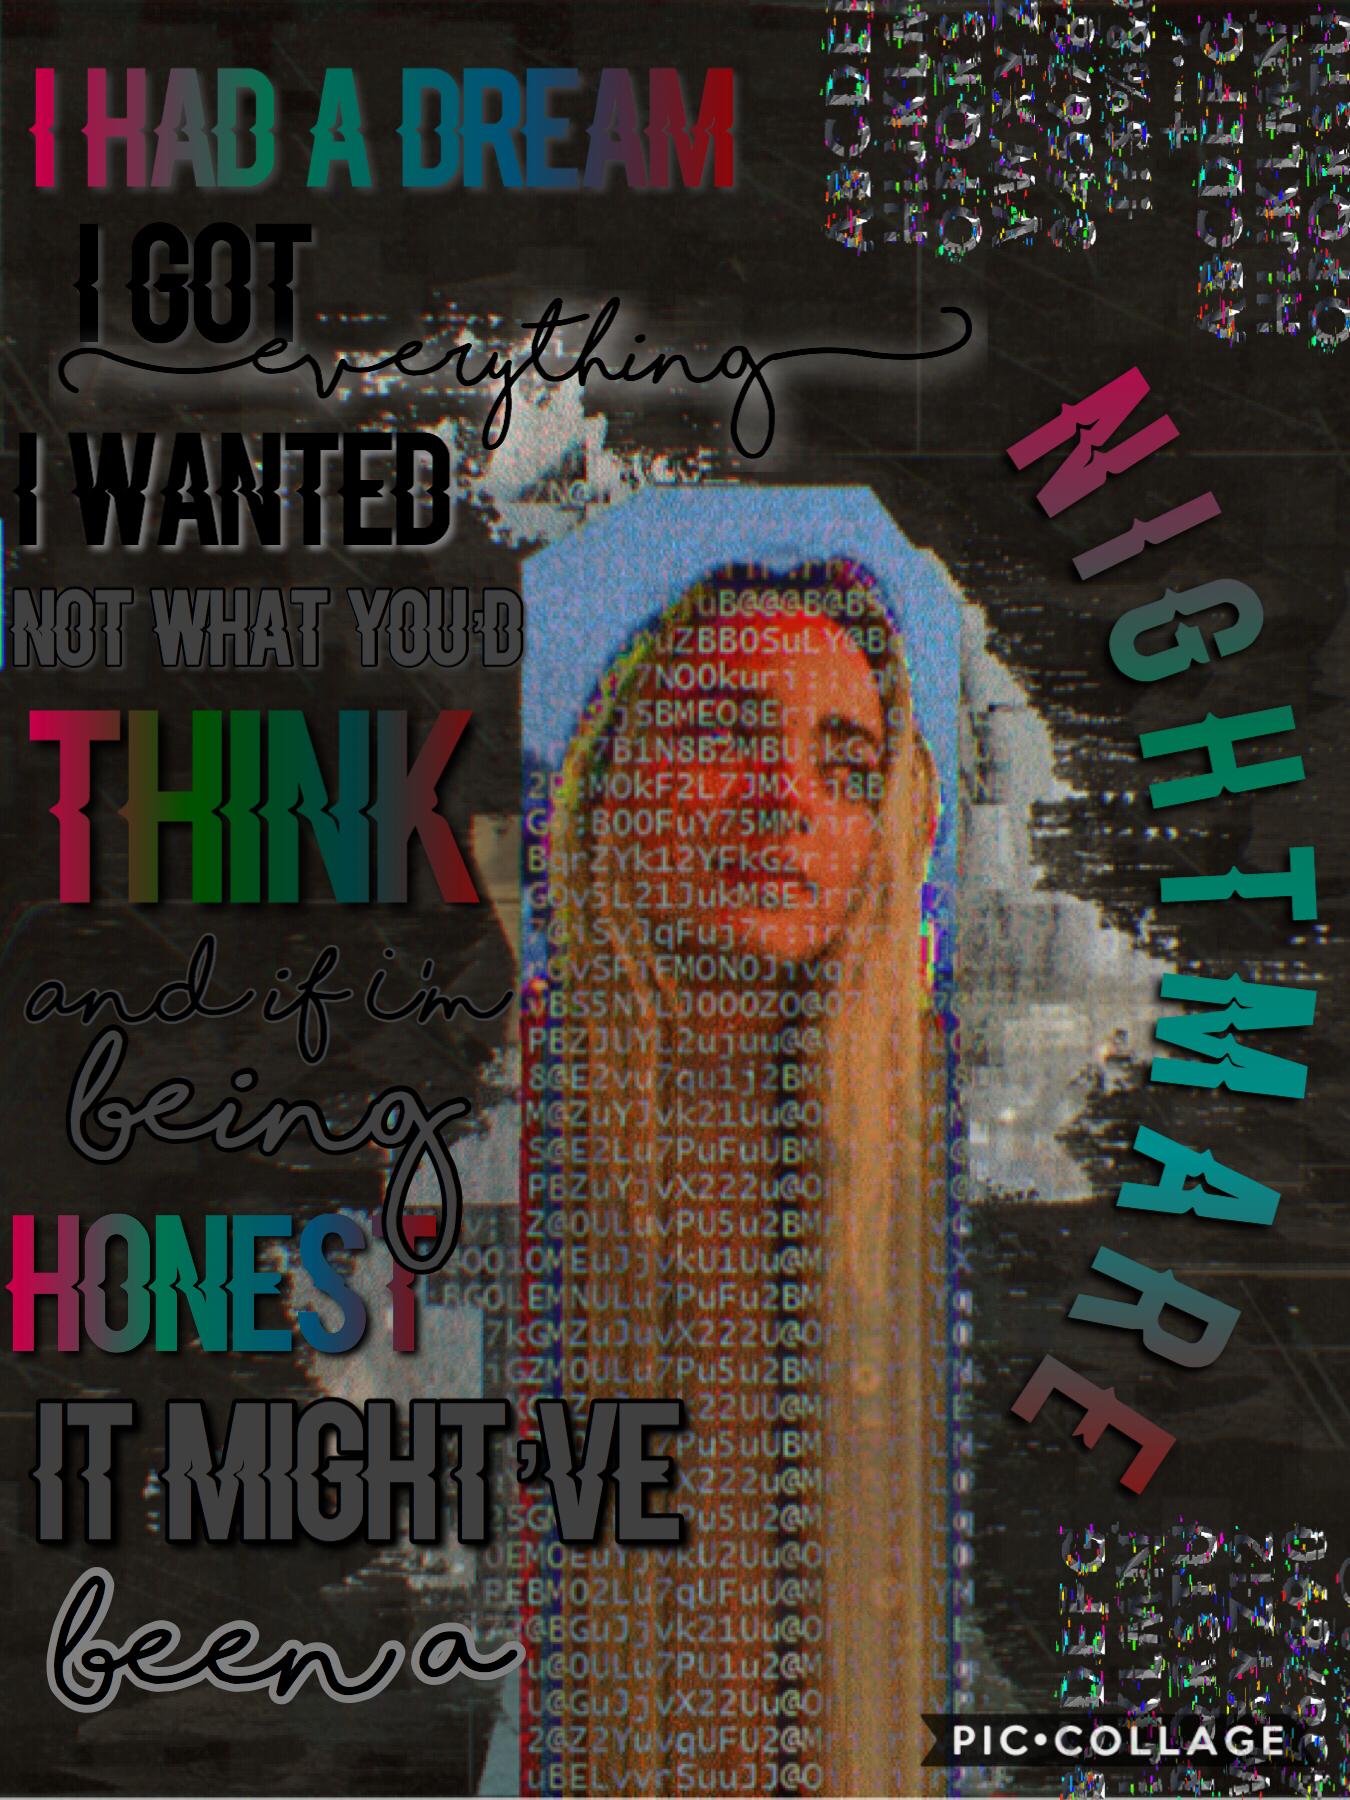 🥳🥳😝 TAPPITYYYY!
you all know Billie Eilish’s new song right? It’s soooo amazing love her ❤️❤️❤️ anyway what does everyone think of this?
Ik it’s a huge mess I’m sorry 😂😂❤️
Round 2 for my vogue games coming soon!
Qotd: should I start doing qotd? 